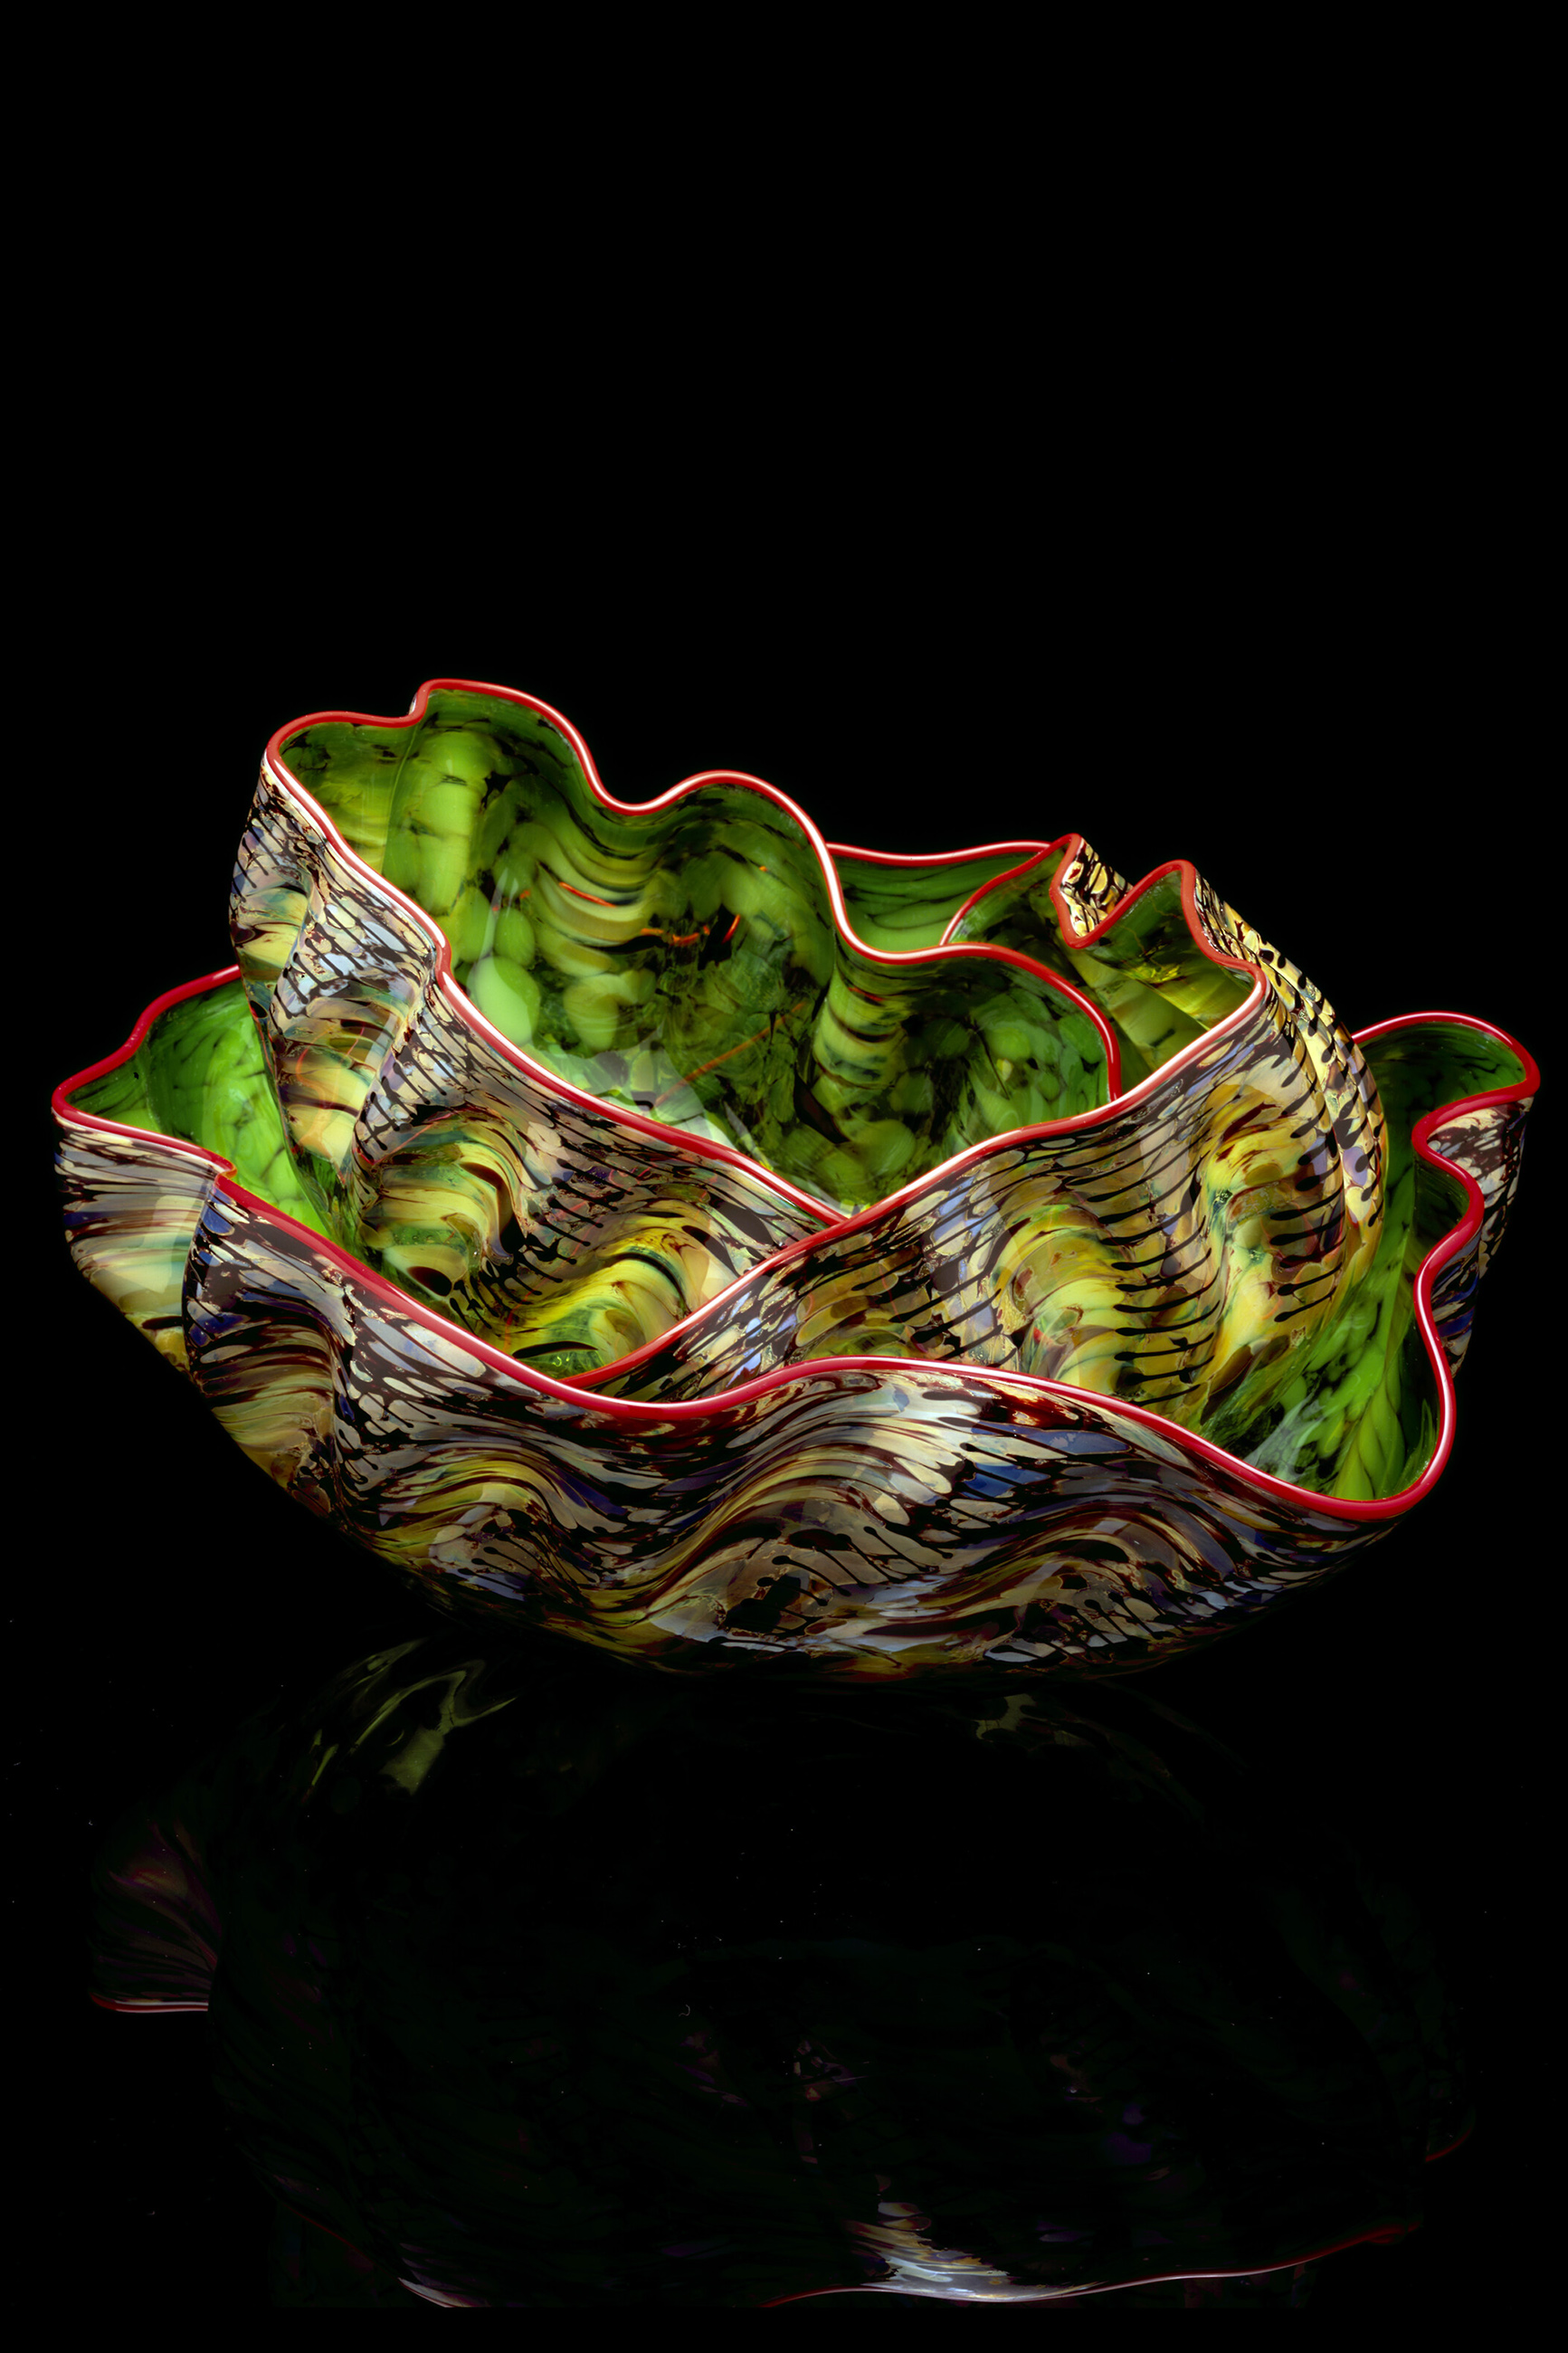 DALE CHIHULY - LEAF GREEN PHEASANT MACCHIA SET WITH RED LIP WRAPS, 2002